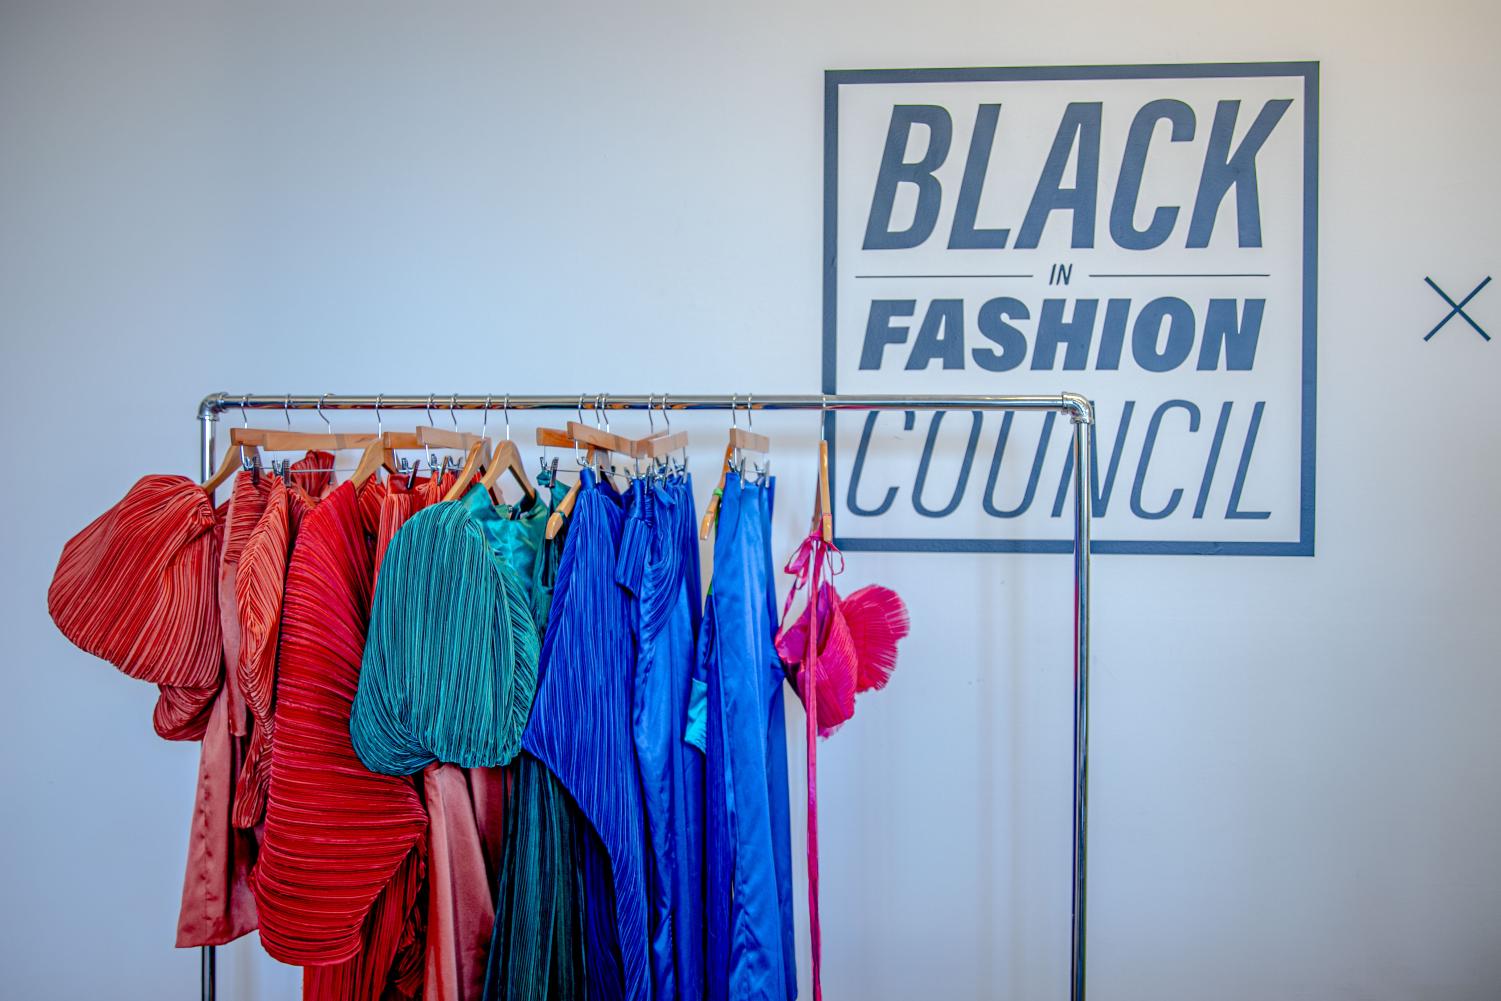 Black+in+Fashion+Council+showroom+spotlights+new+Black+talent+and+sustainability